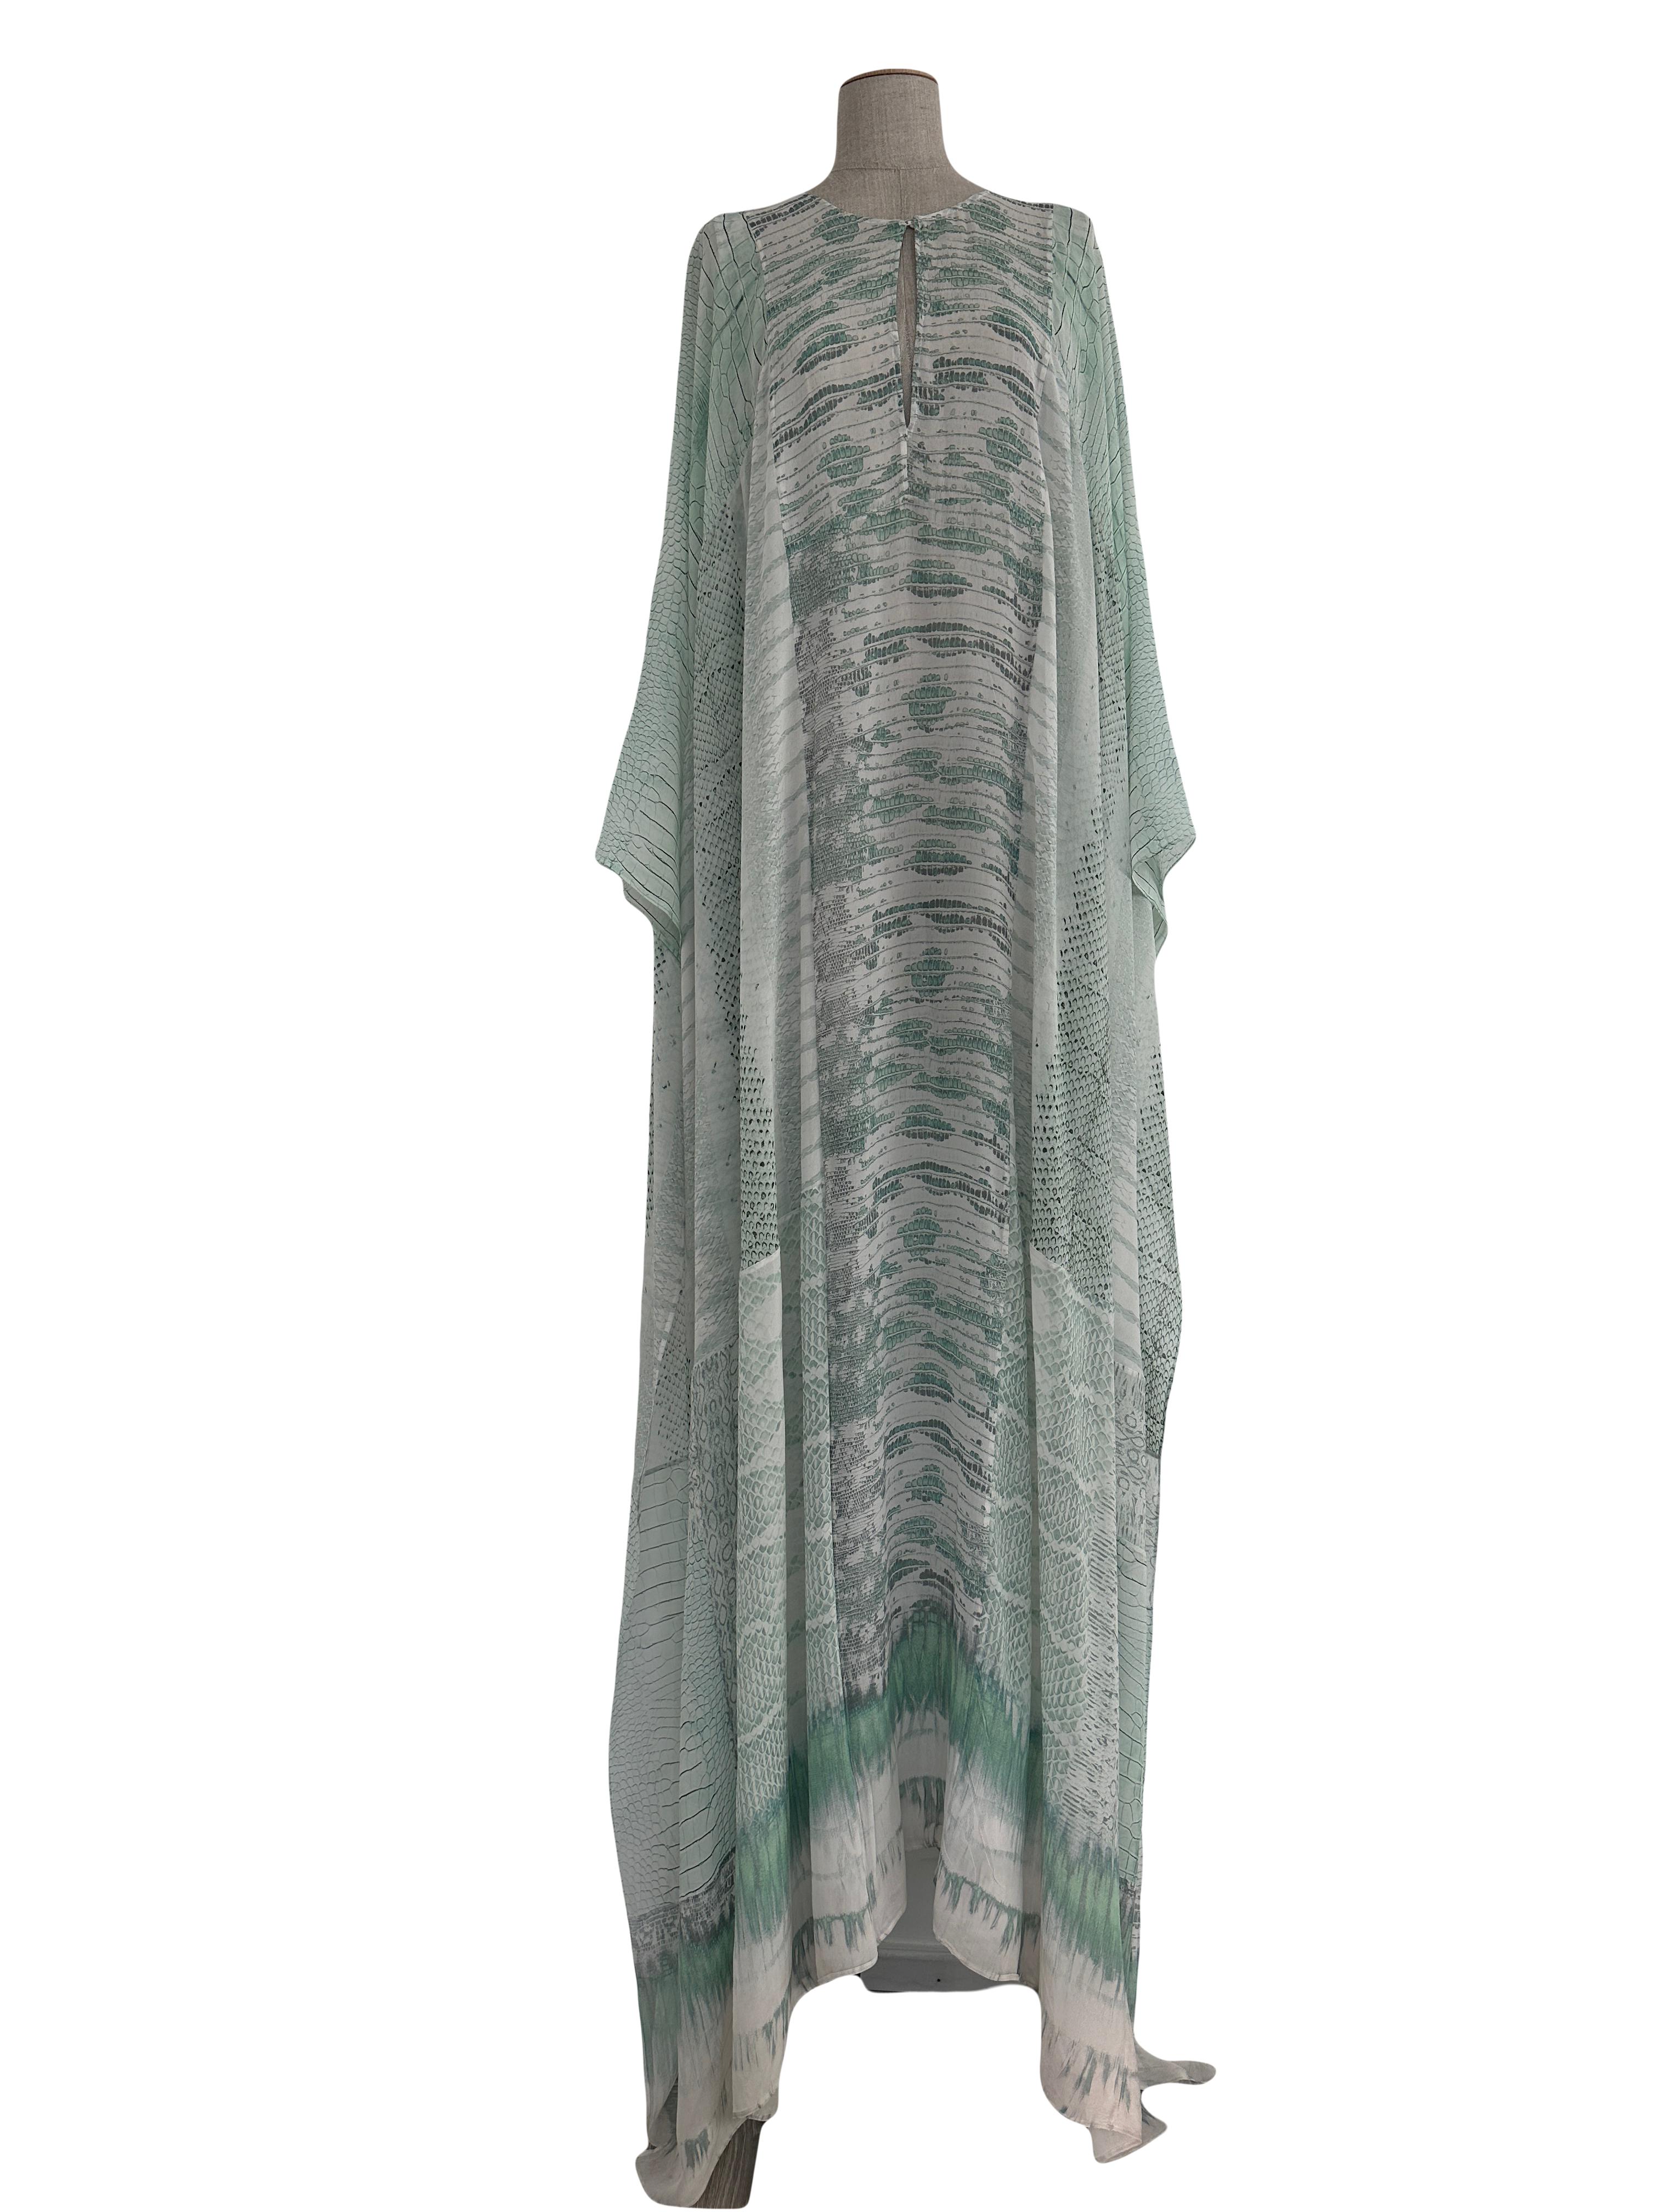 - Roberto Cavalli 
- A star piece of the Spring/Summer 2014 runway collection
- Featured in numerous numerous S/S 2014 editorials  
- Silk Chiffon in a beautiful subtle mint green with snake print
- Haute bohemia
- Maxi length
- Loose fitting so